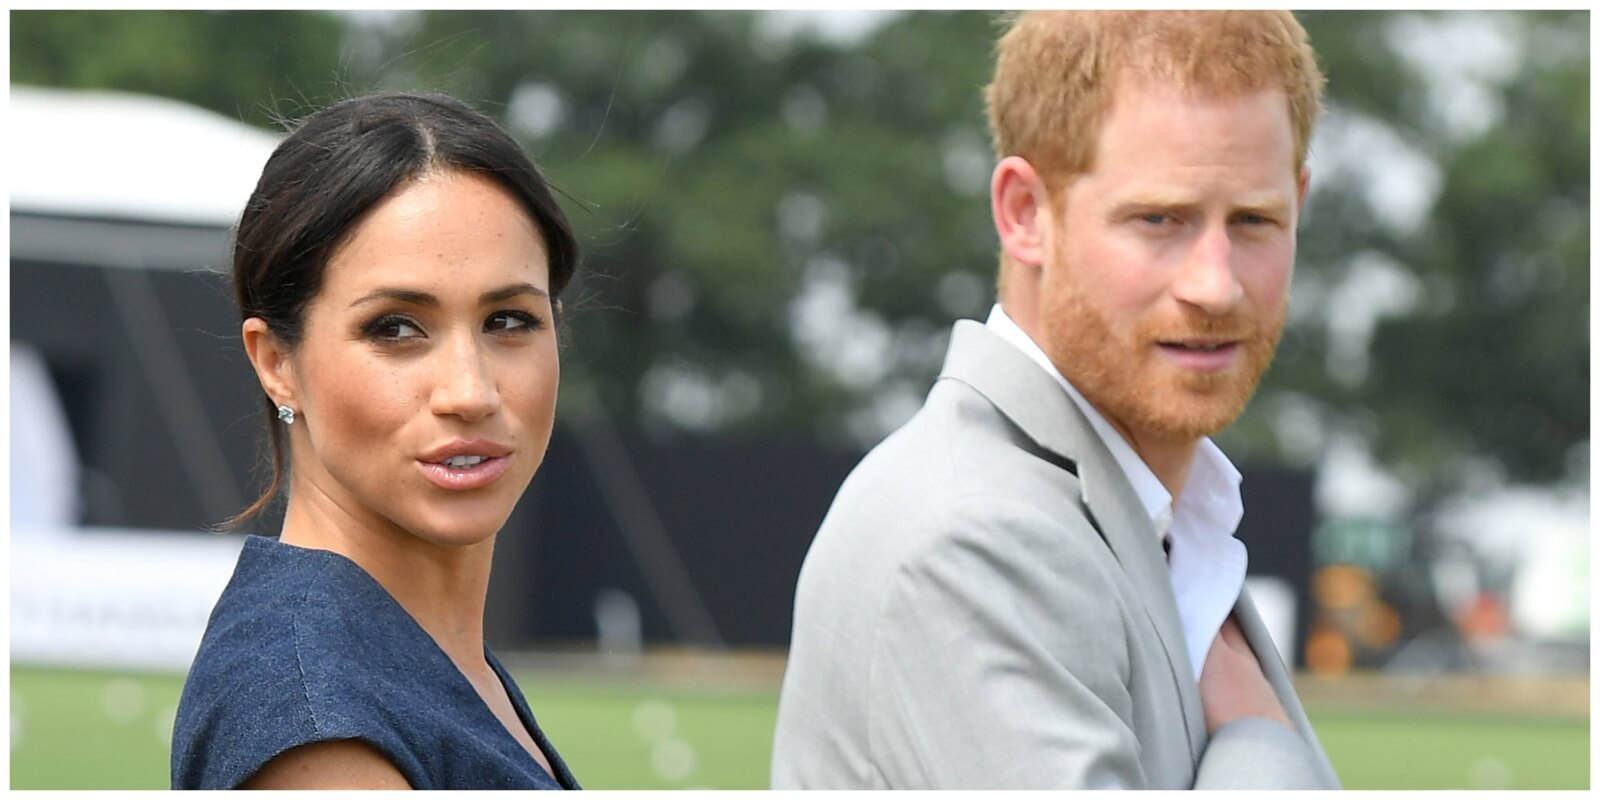 Meghan Markle and Prince Harry attend the Sentebale ISPS Handa Polo Cup at the Royal County of Berkshire Polo Club on July 26, 2018 in Windsor, England.